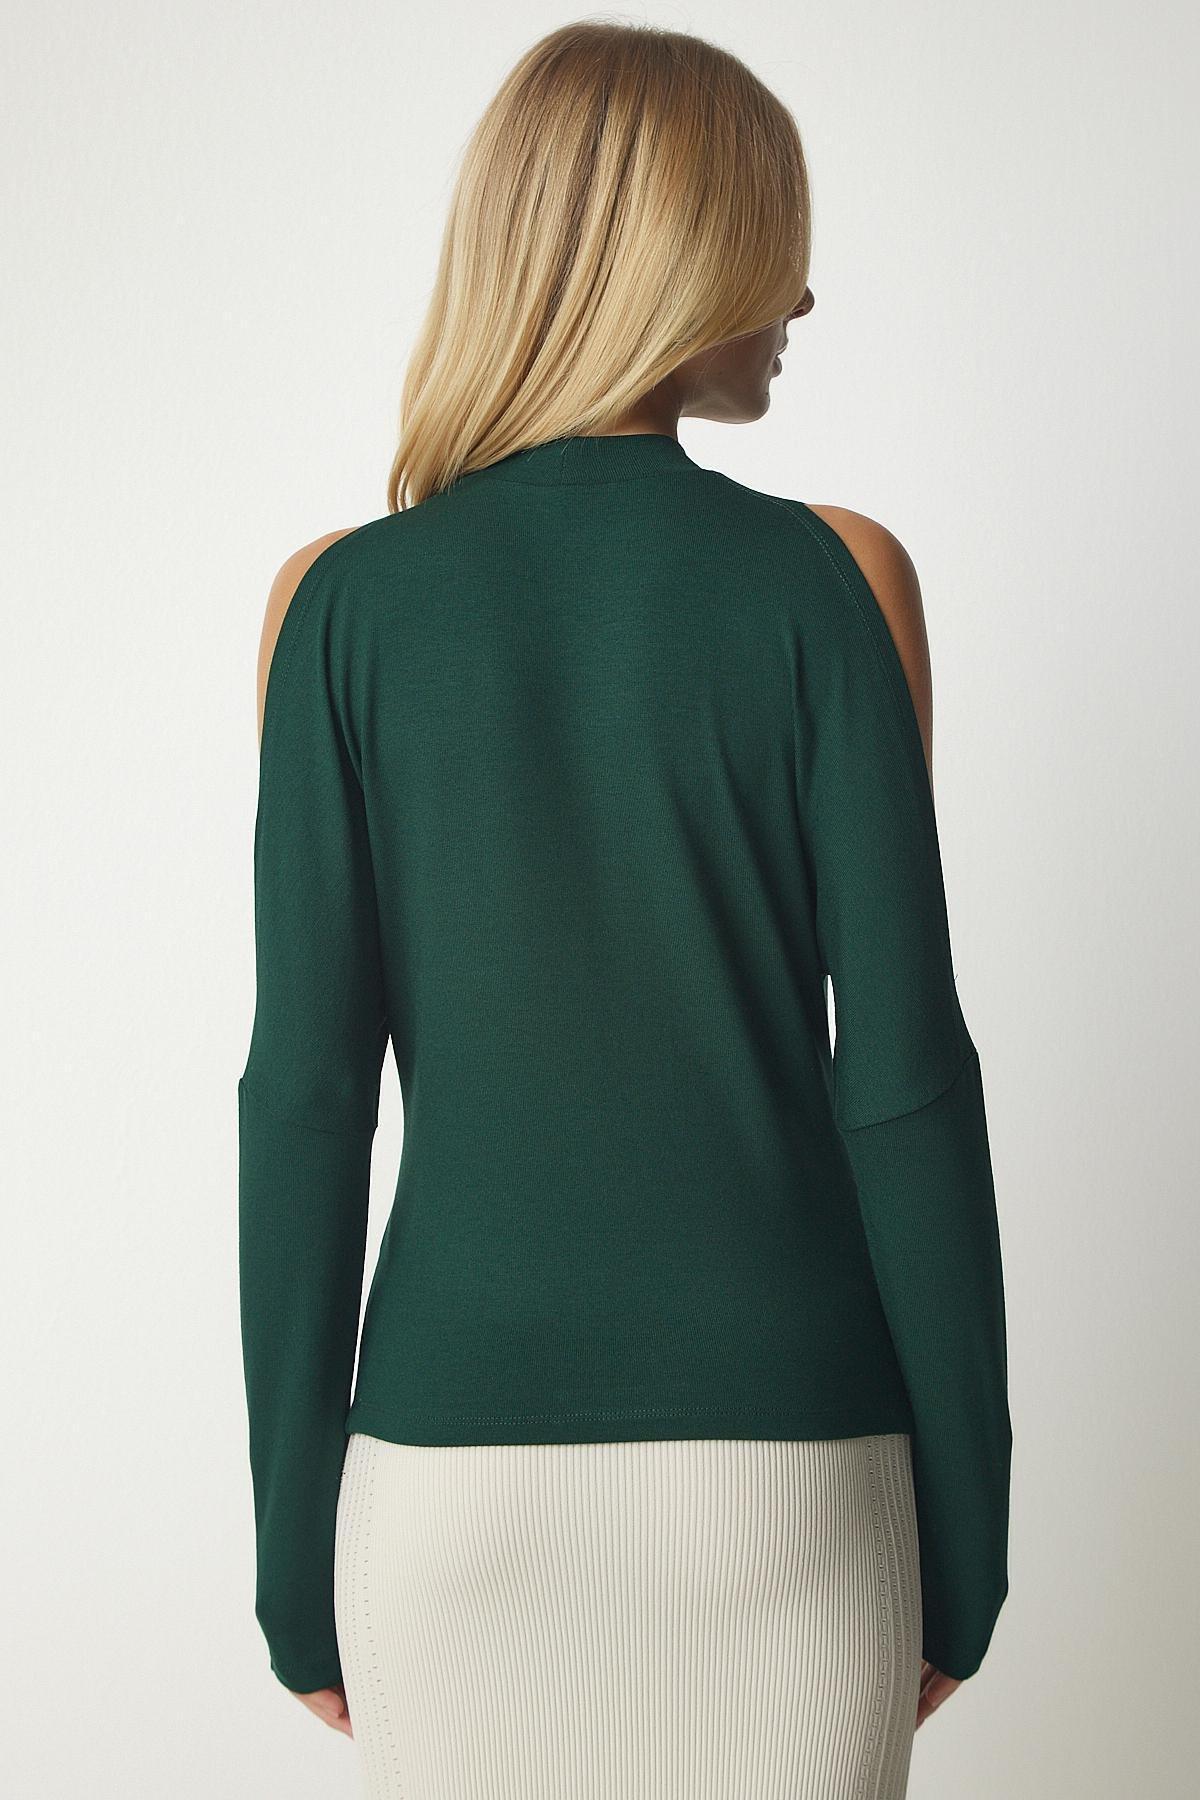 Happiness Istanbul - Green Knitwear Blouse With Decollate